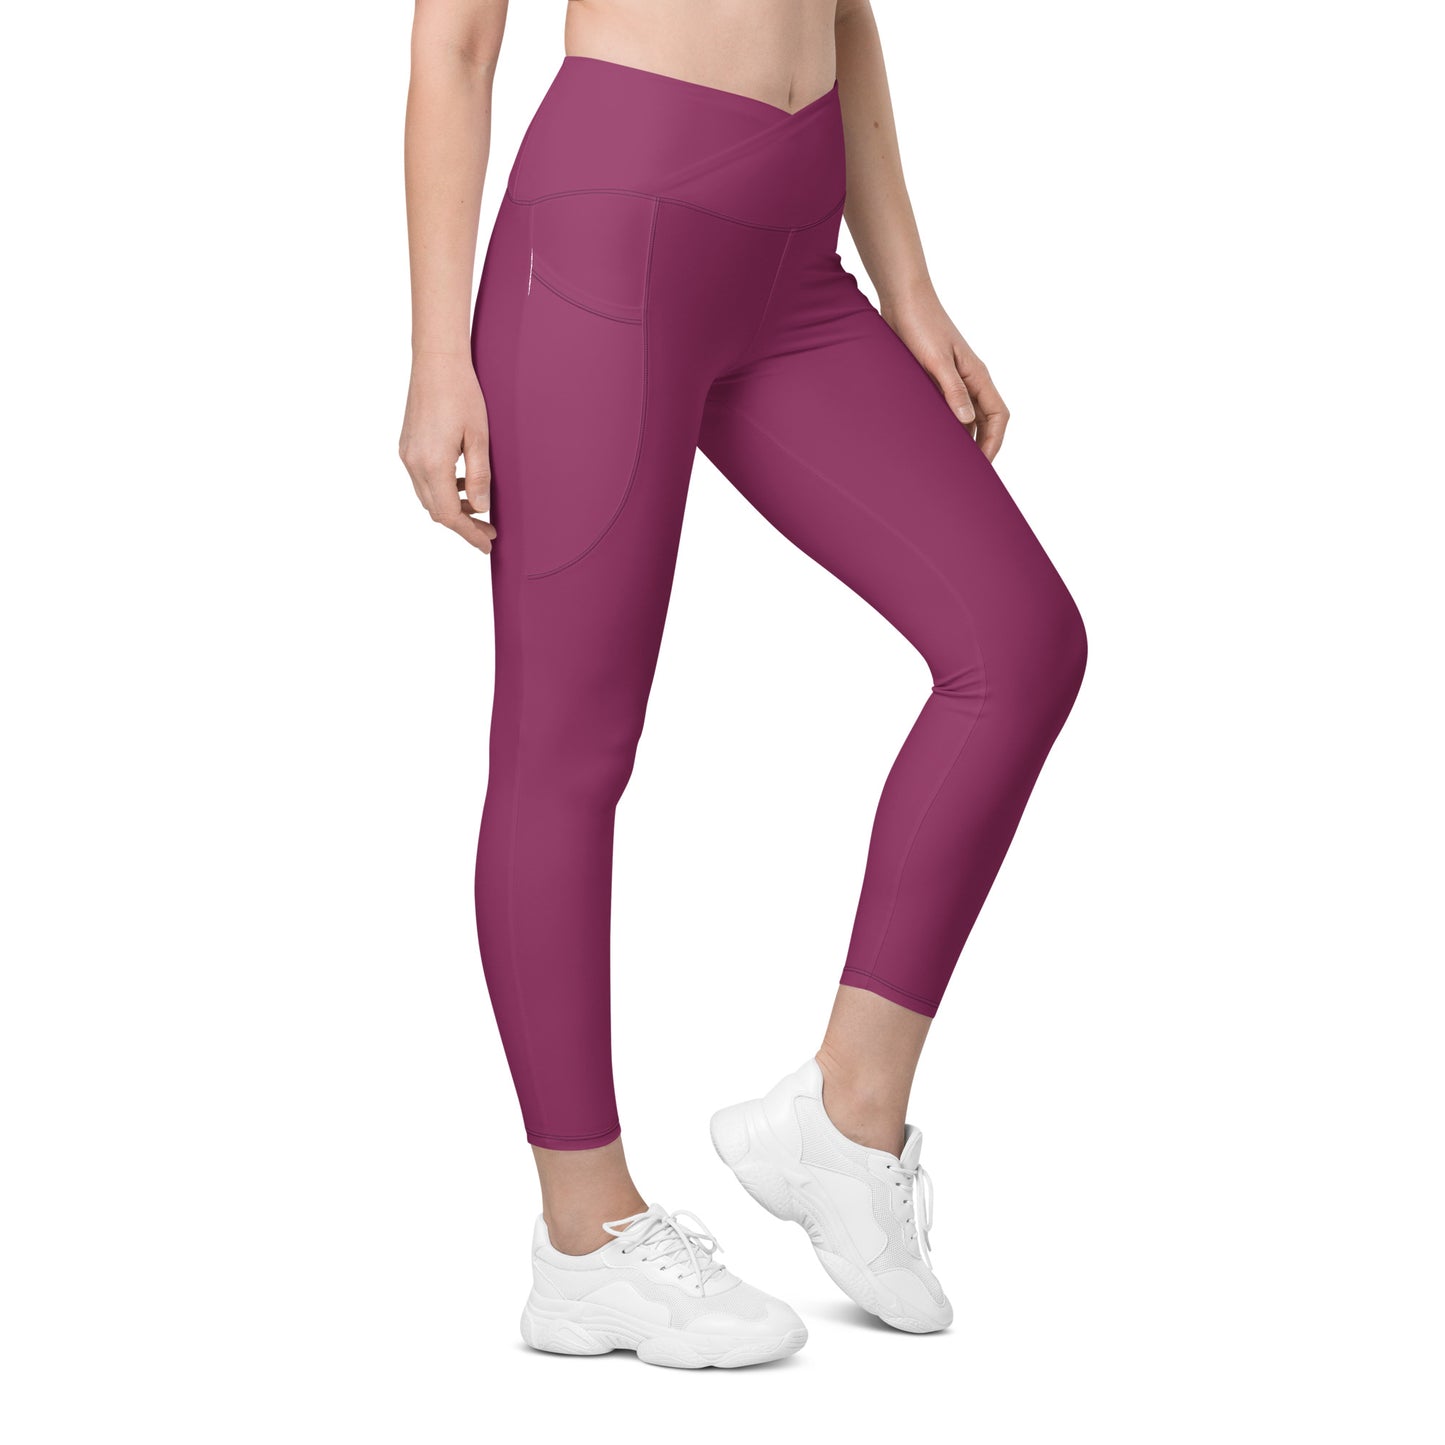 Schottenkaro Solid Plum Crossover Waist 7/8 Recycled Yoga Leggings / Yoga Pants with Pockets